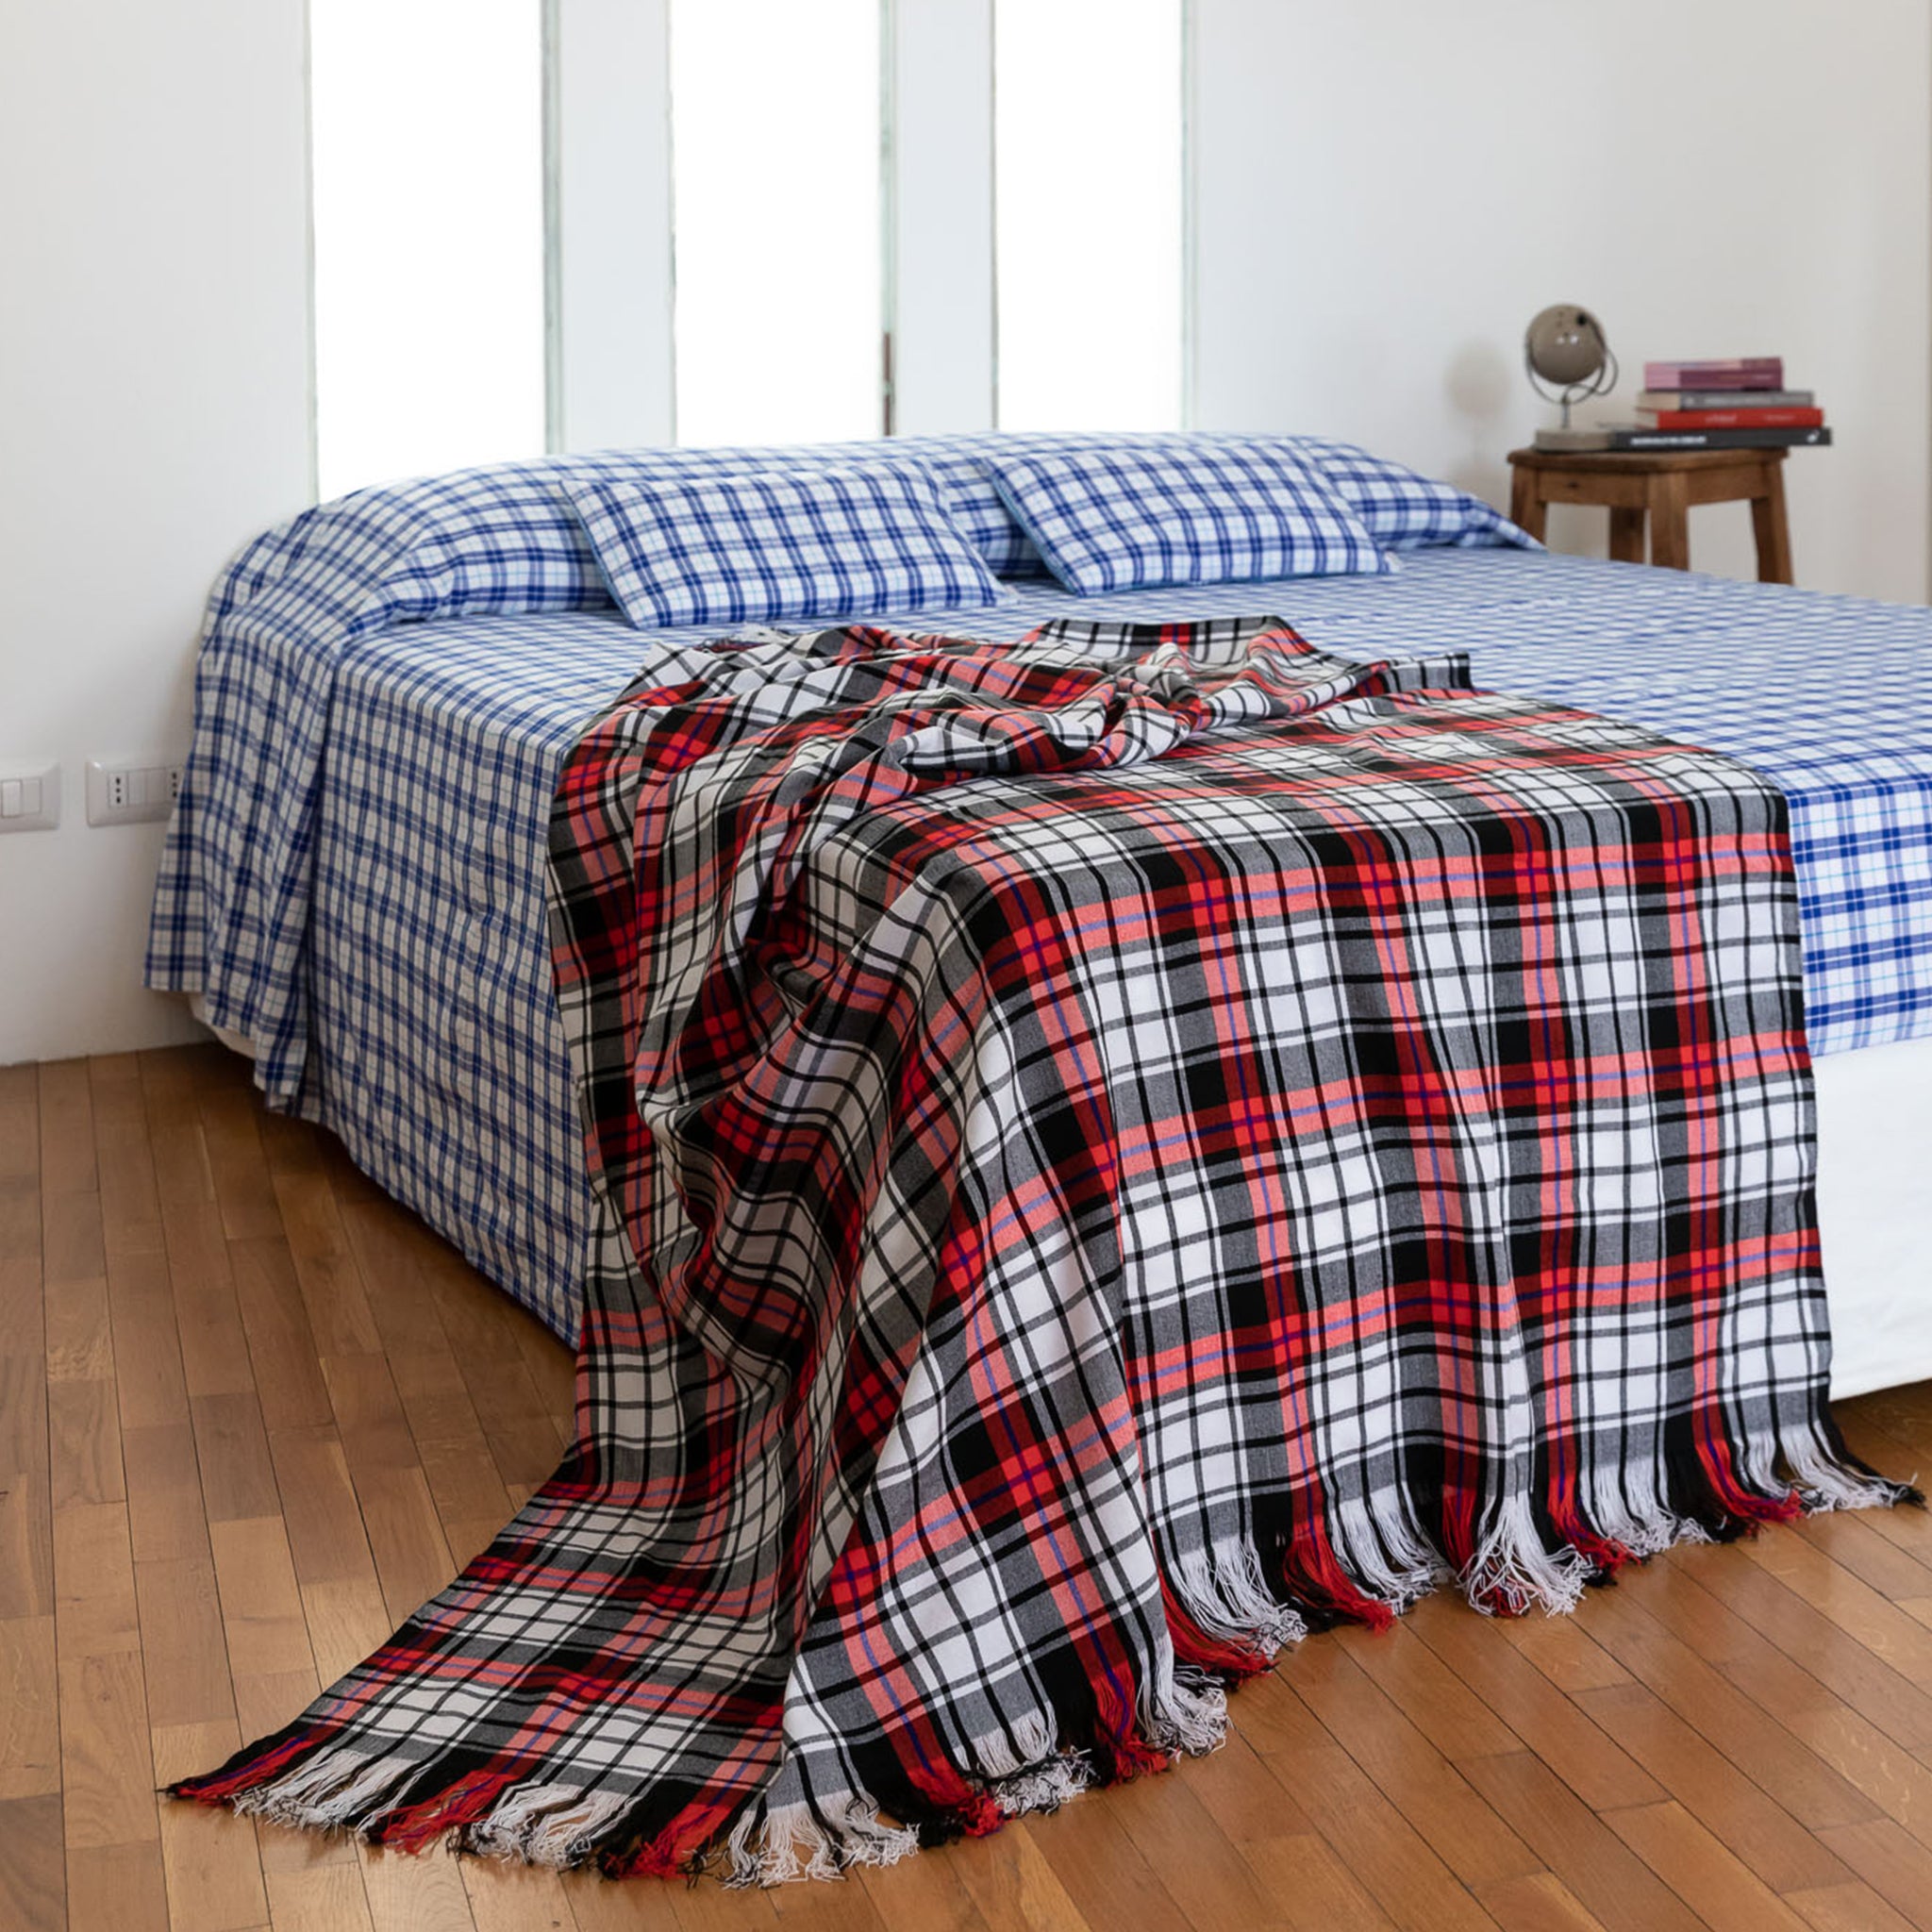 Checked blanket black, white and red in Maasai Shuka fabric above double bed